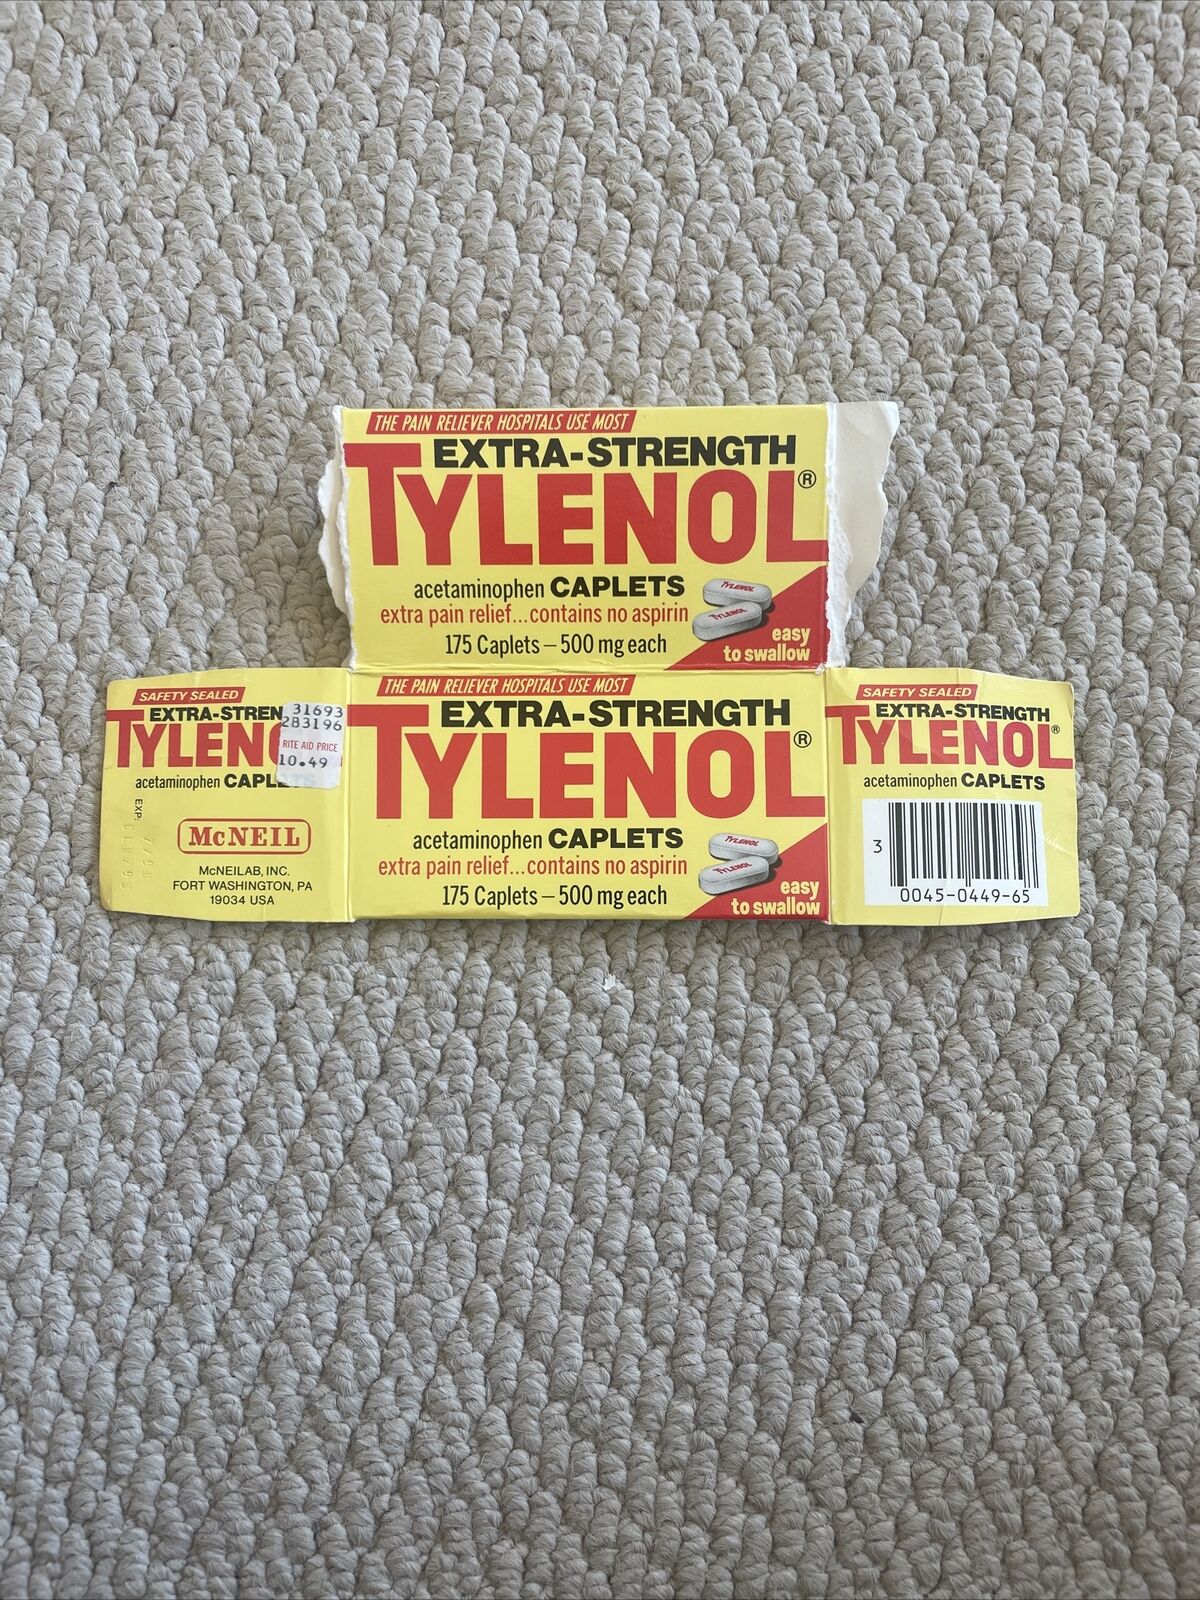 Vintage 1980s Tylenol “Safety Sealed” Packaging  After Poisonings